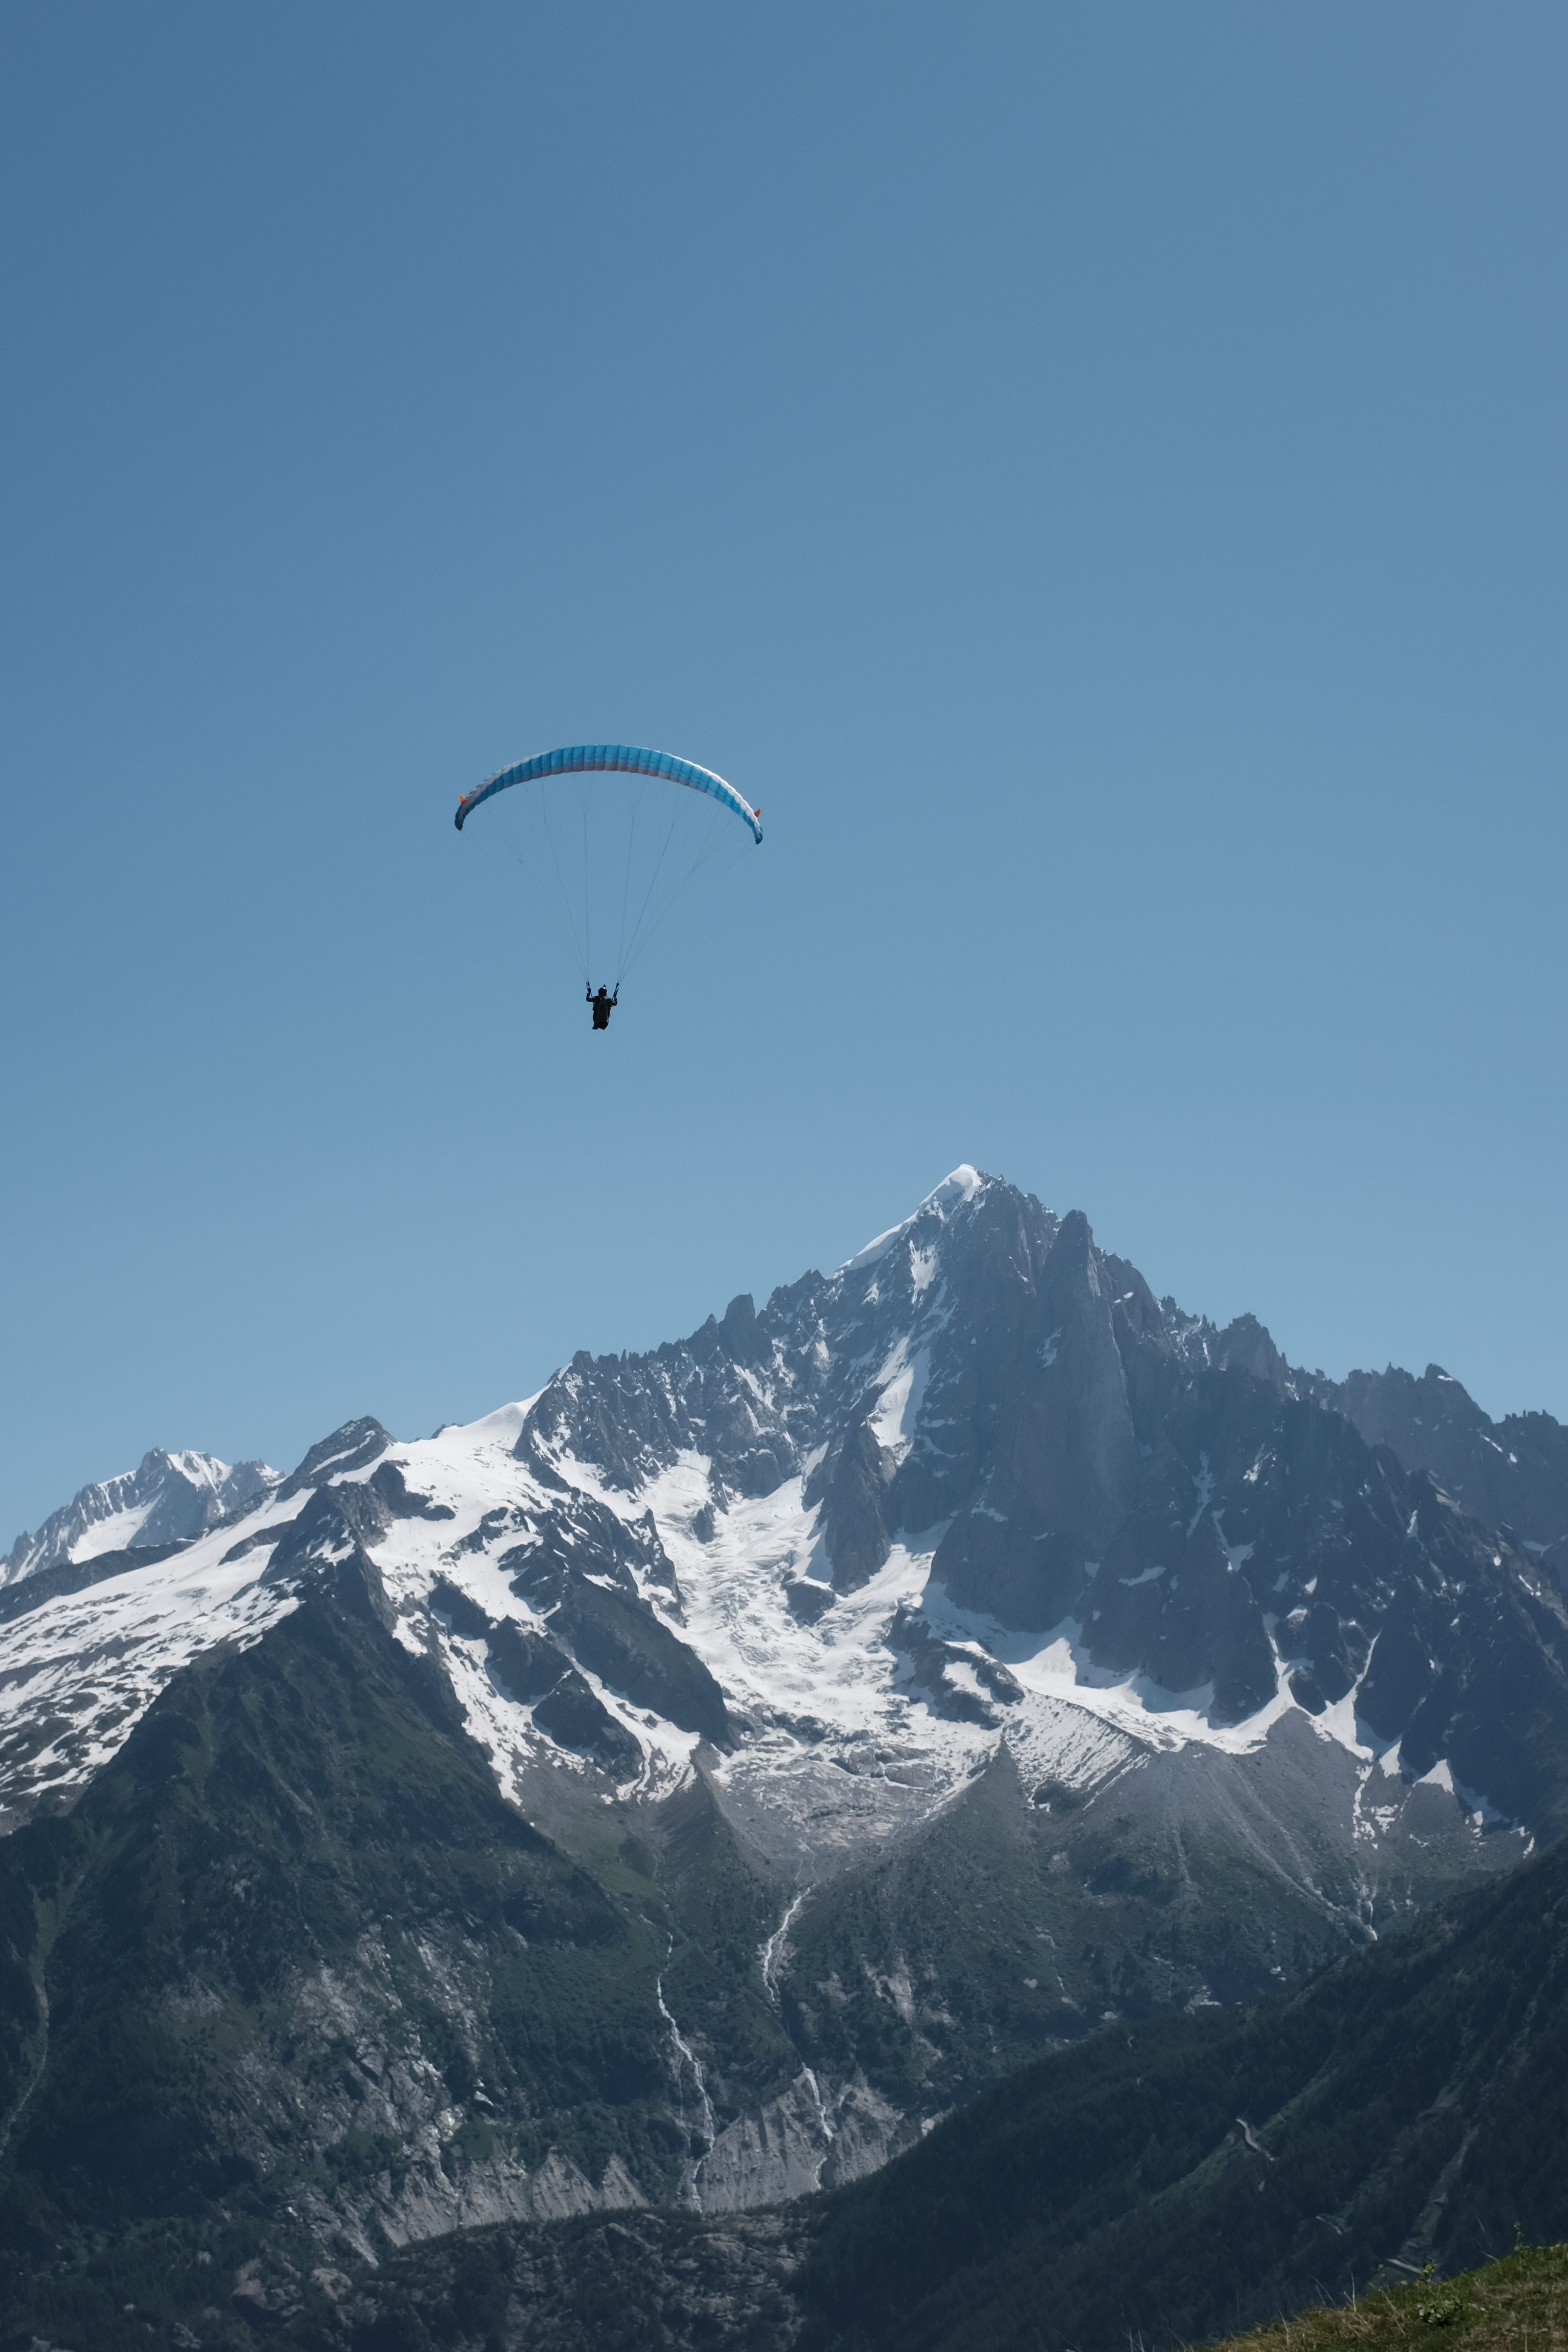 Paragliding over mountains
